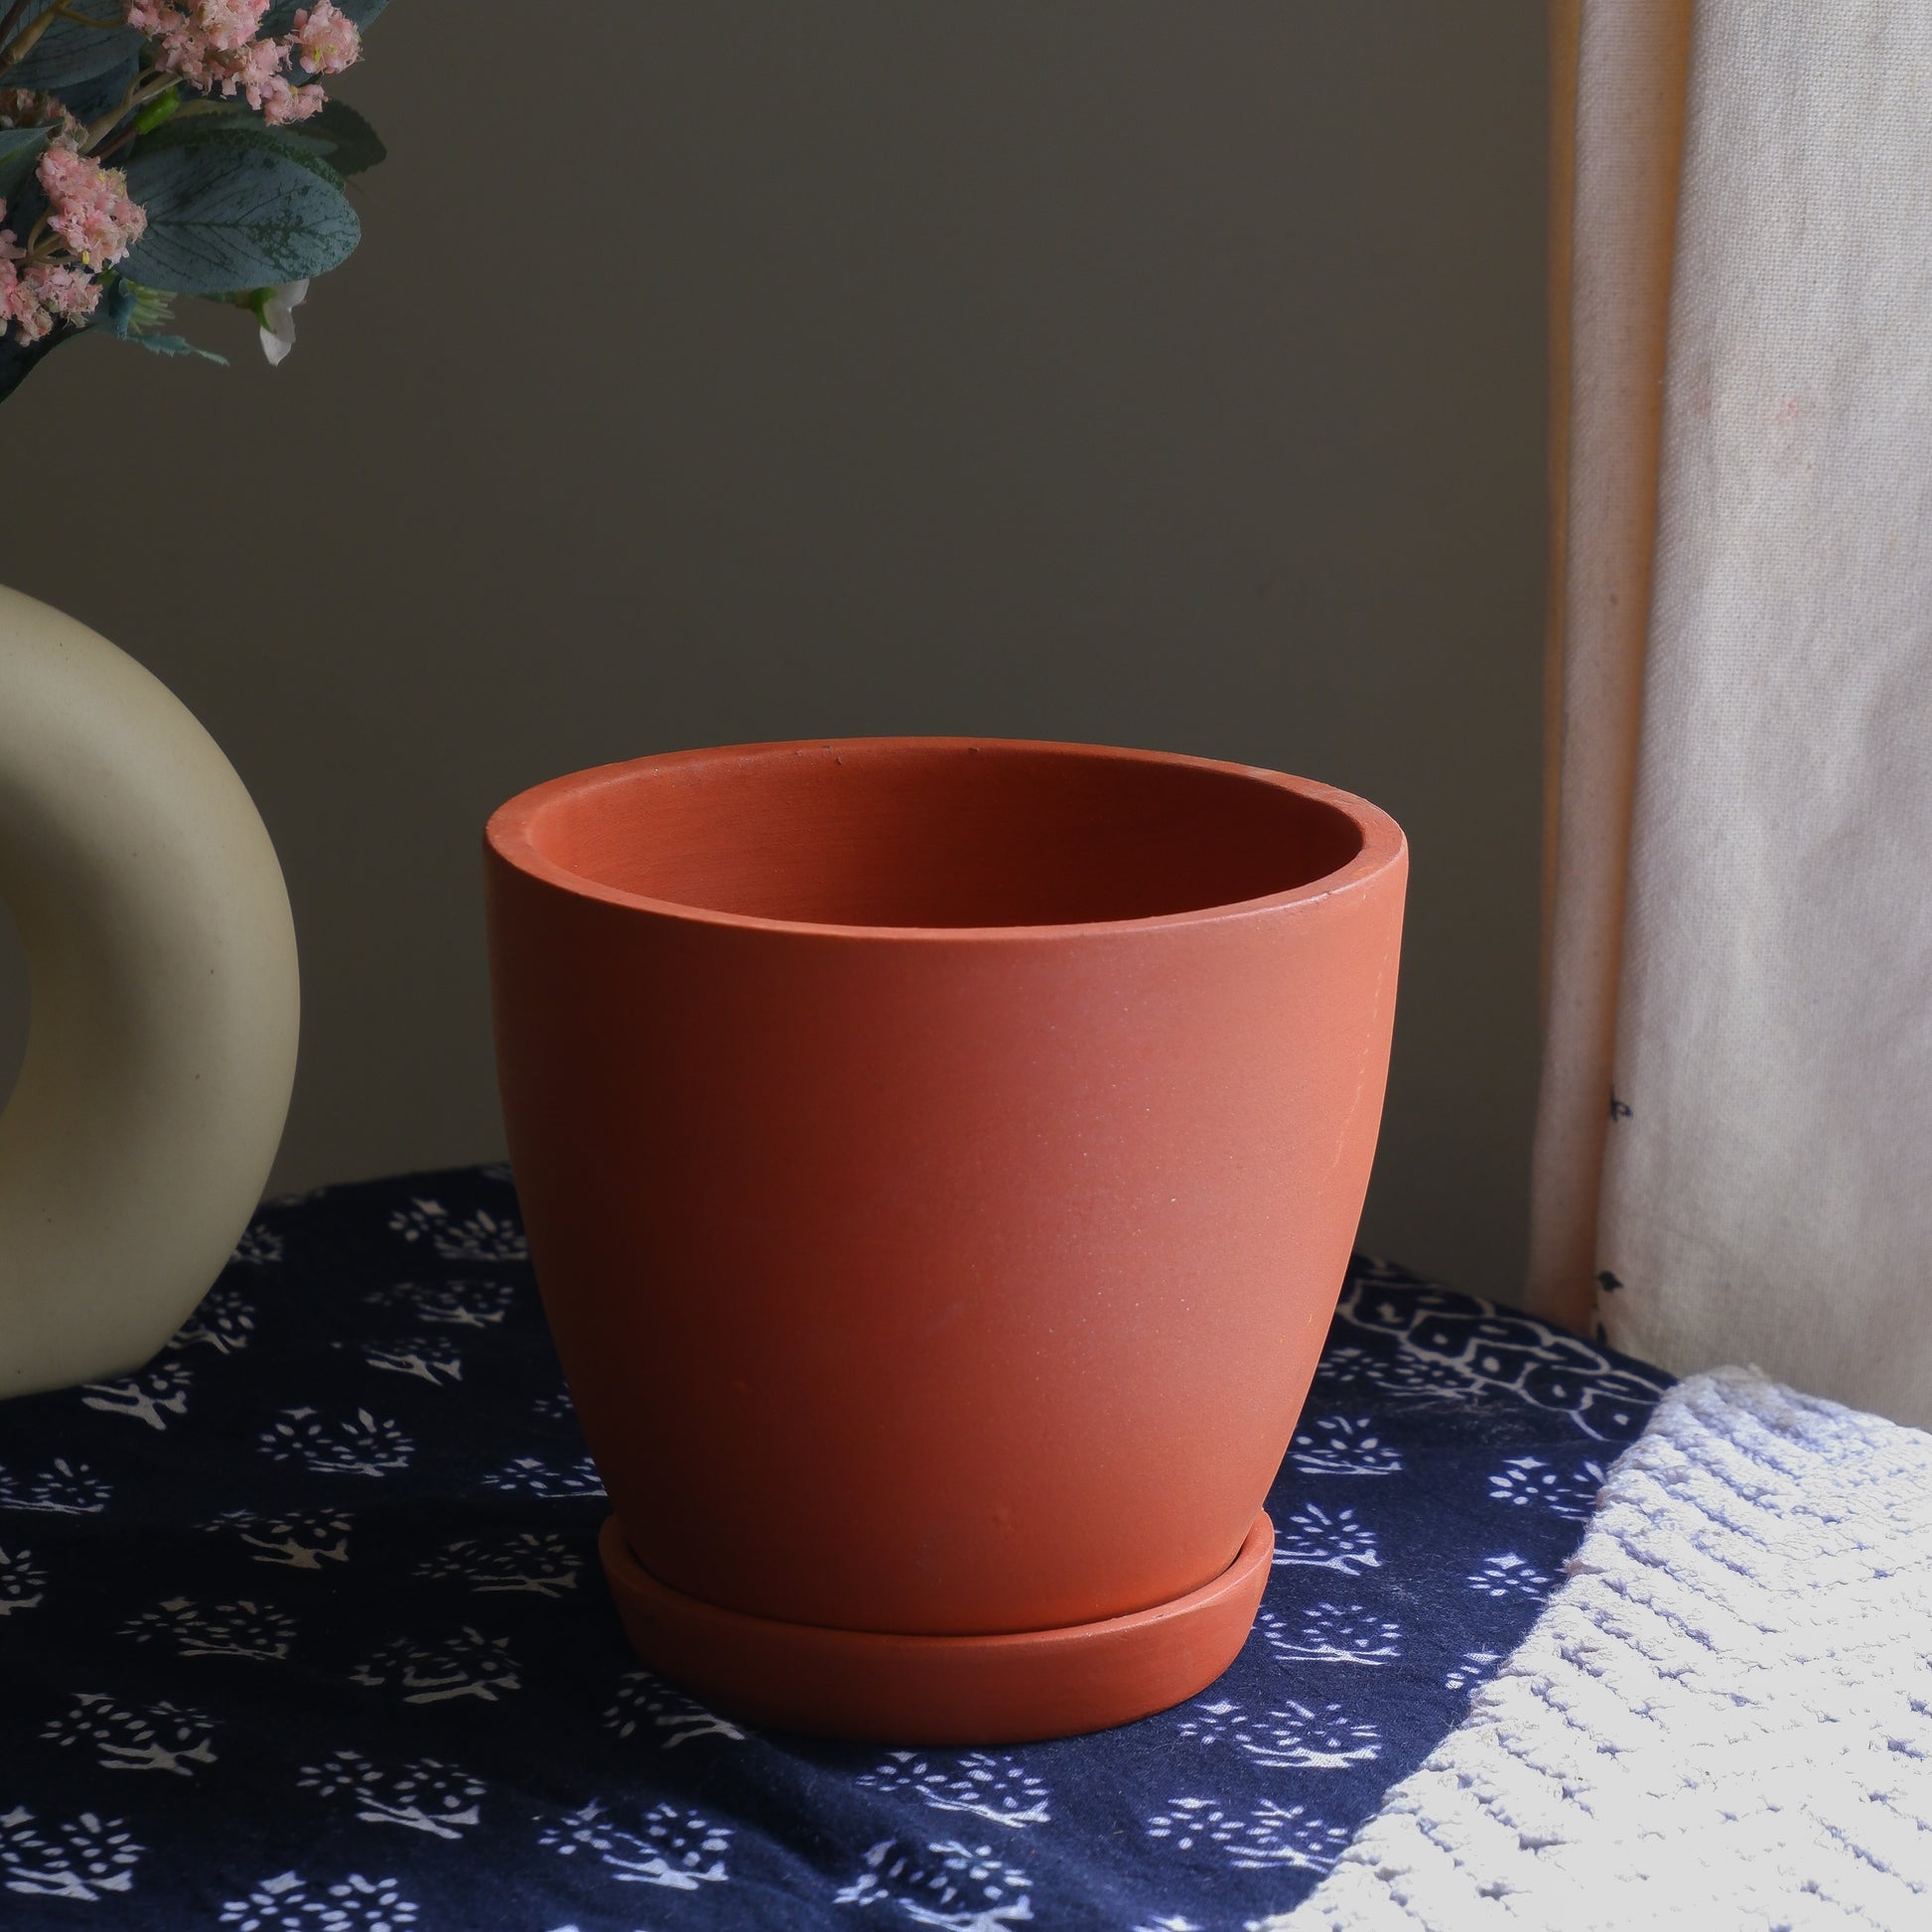 Shop online best 6 inch Terracotta Planters for indoor plants. Delivered all India